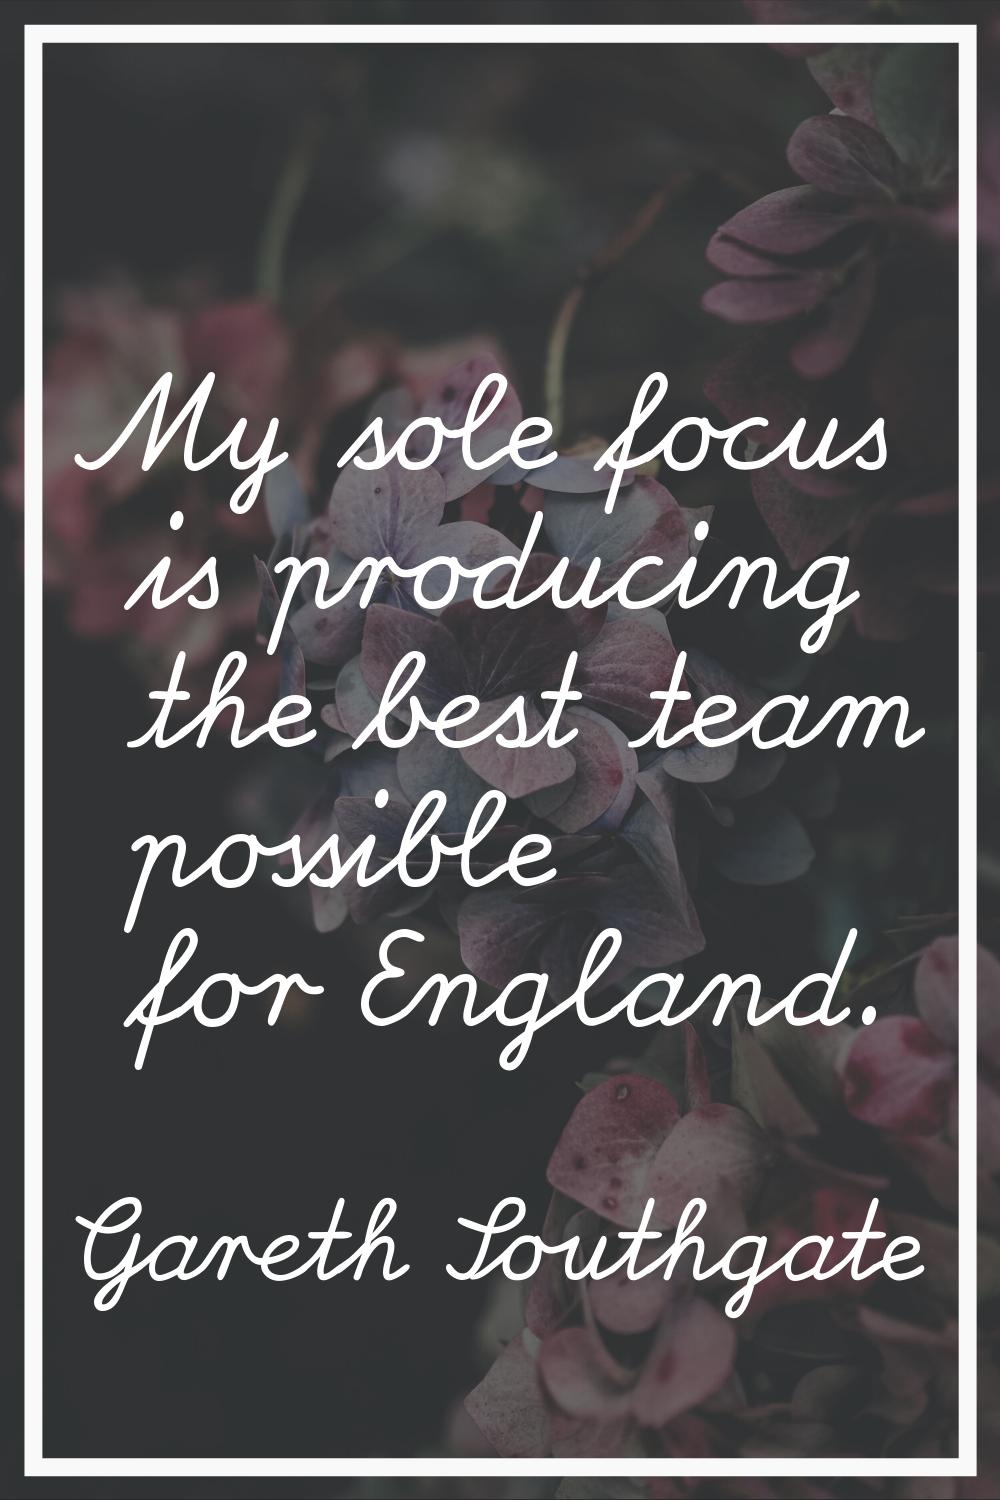 My sole focus is producing the best team possible for England.